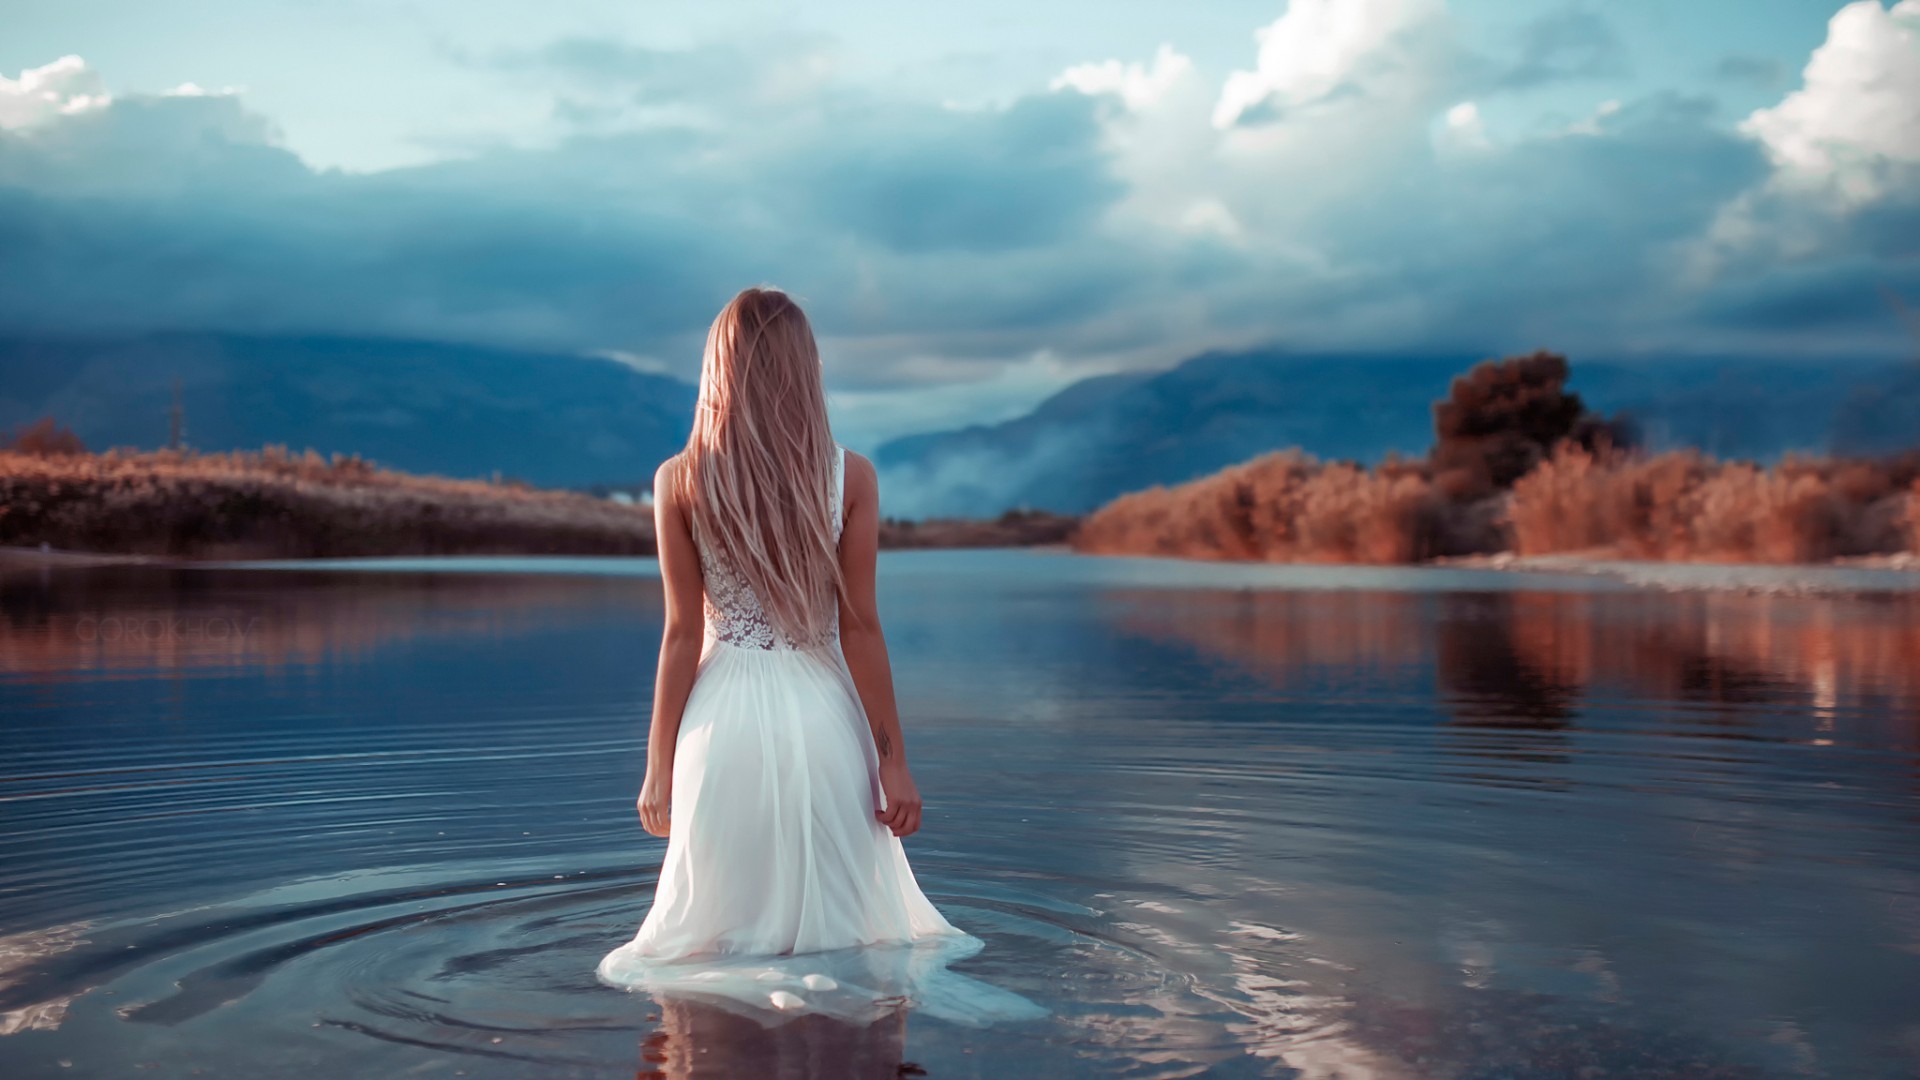 A girl in a light white dress walks into the water